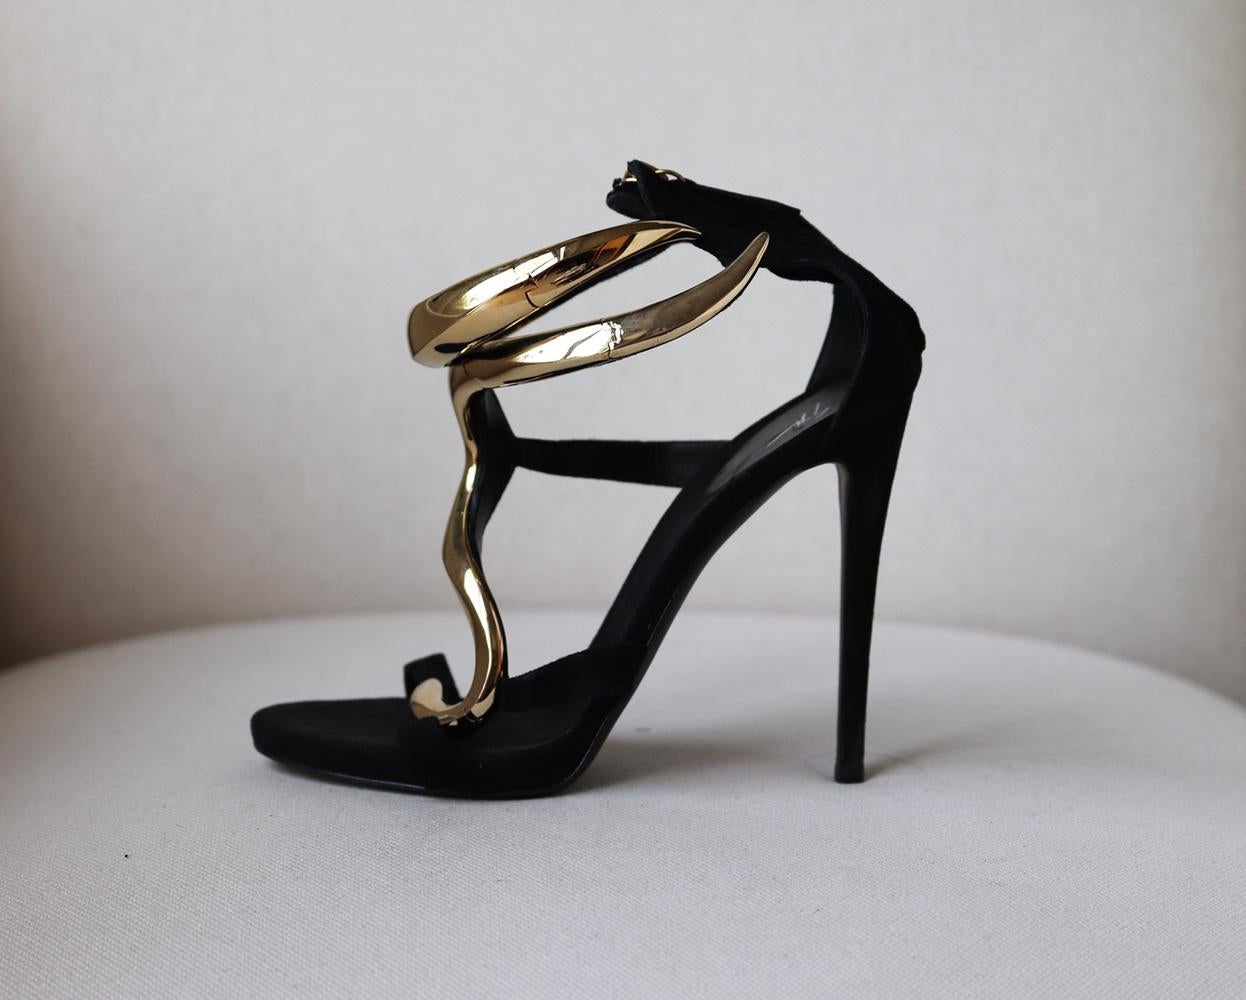 Aptly named 'Alien', Giuseppe Zanotti's sandals have an undeniable wow factor with a bold metal design down the front and platform to perfectly balance the vertiginous heel.
They're made from supple black suede and adorned with oversized polished